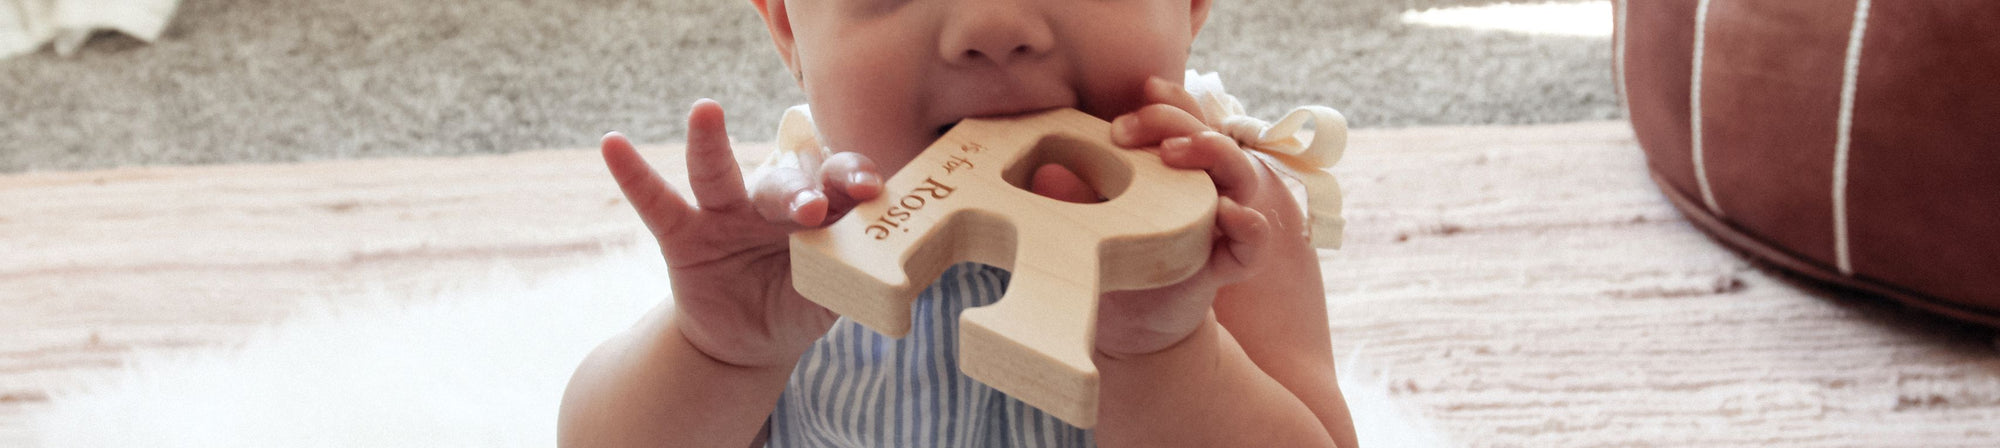 natural wood teethers for babies